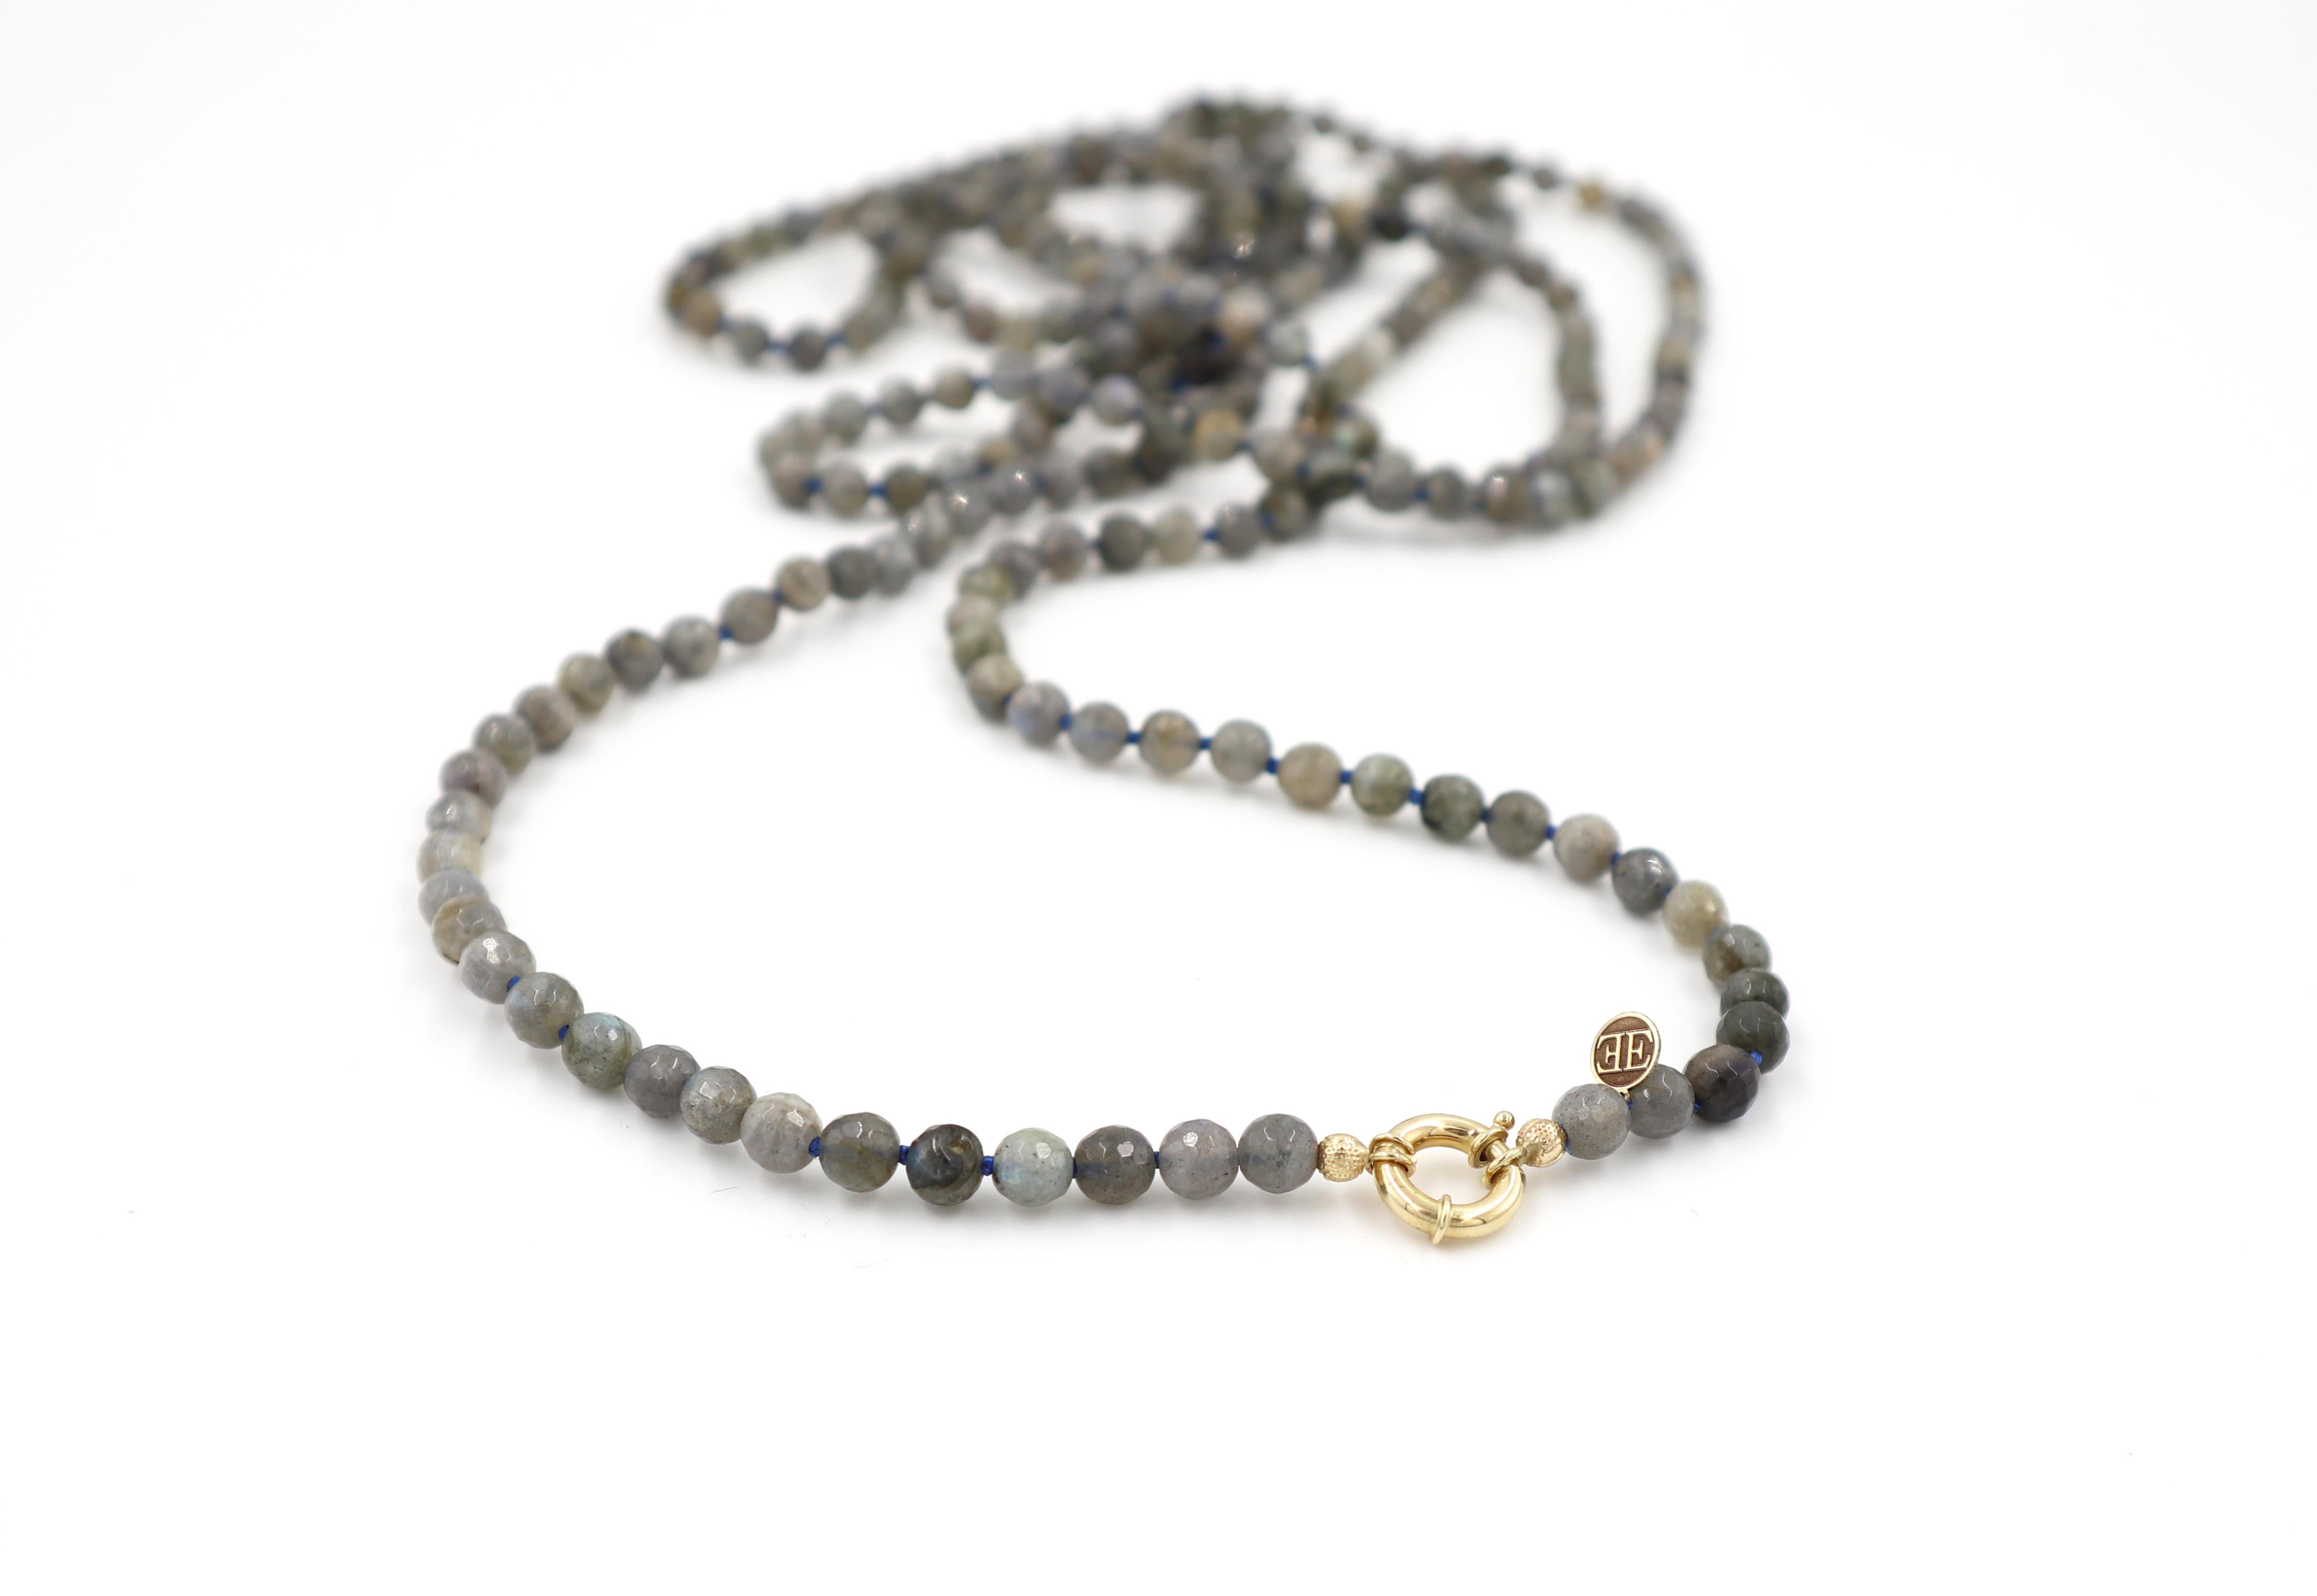 Labradorite Long Necklace with 14k Gold Clasp For Sale 1